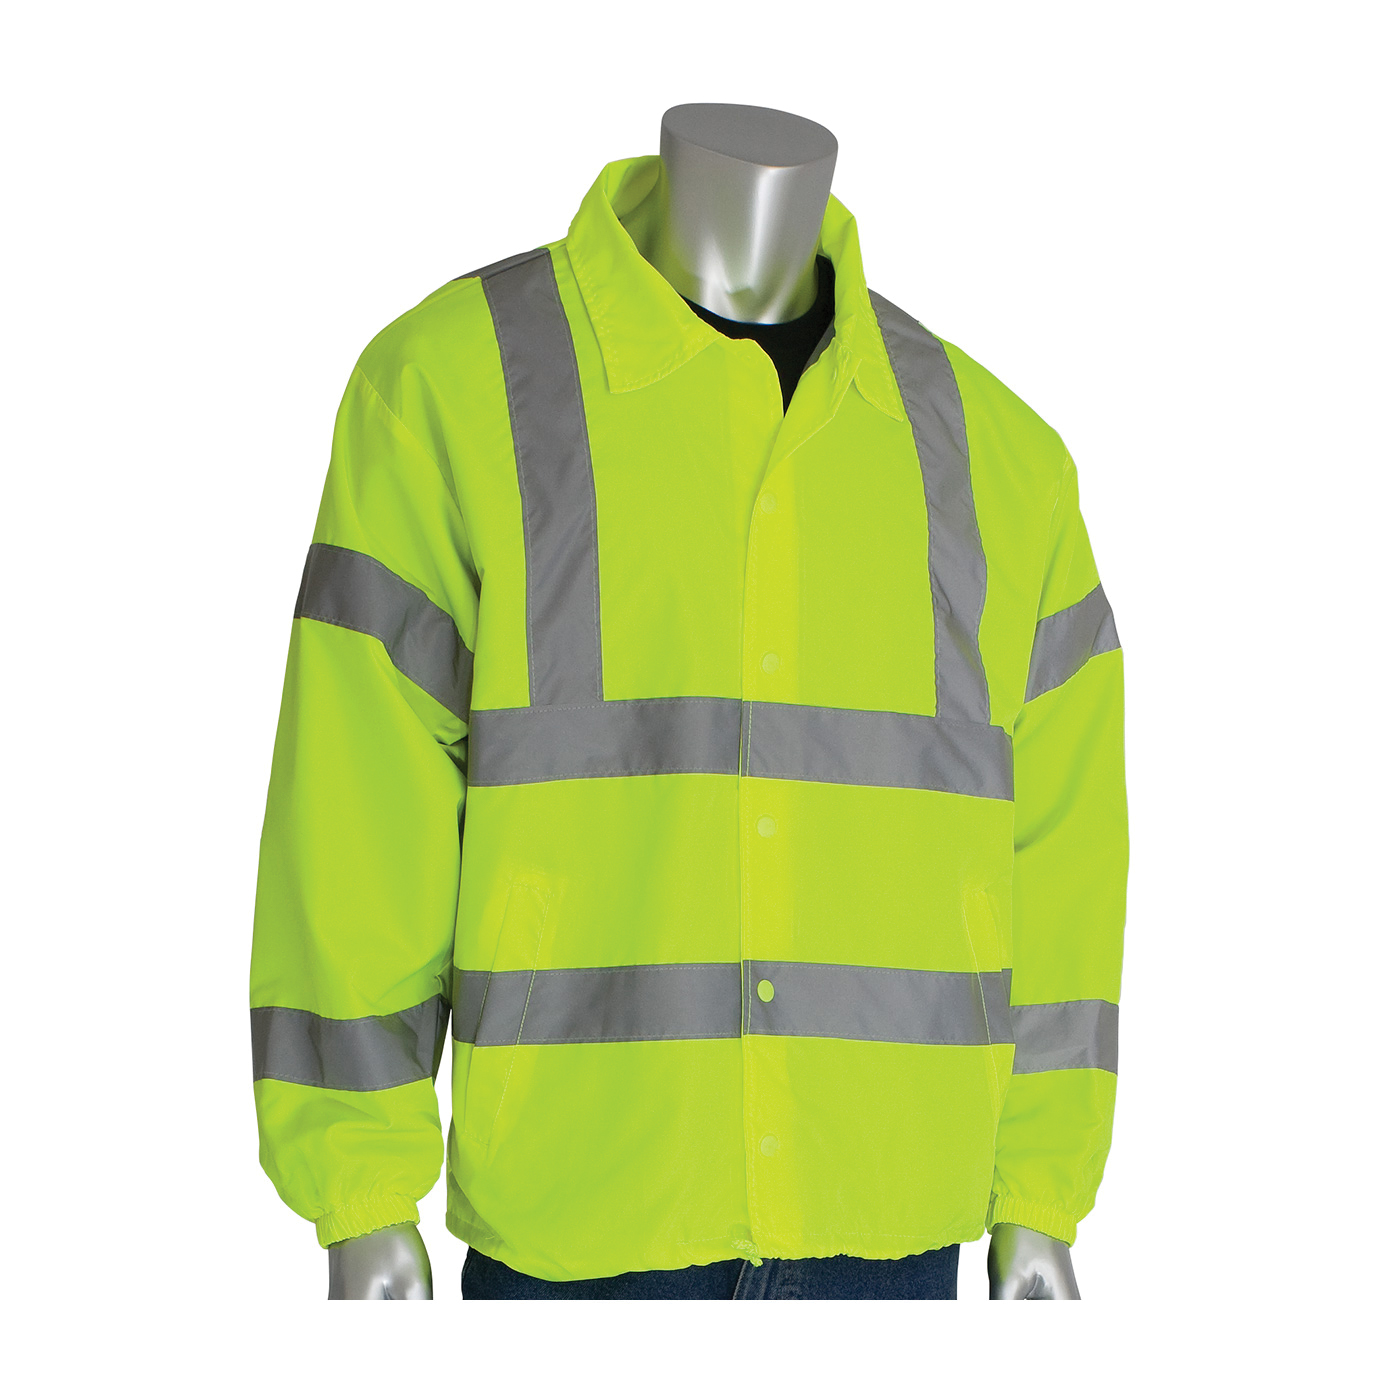 PIP® 333-WBLY-2X Classic Wind Breaker Jacket, Hi-Viz Lime Yellow, Polyester, 57.1 in Chest, Specifications Met: ANSI 107 Class 3 Type R